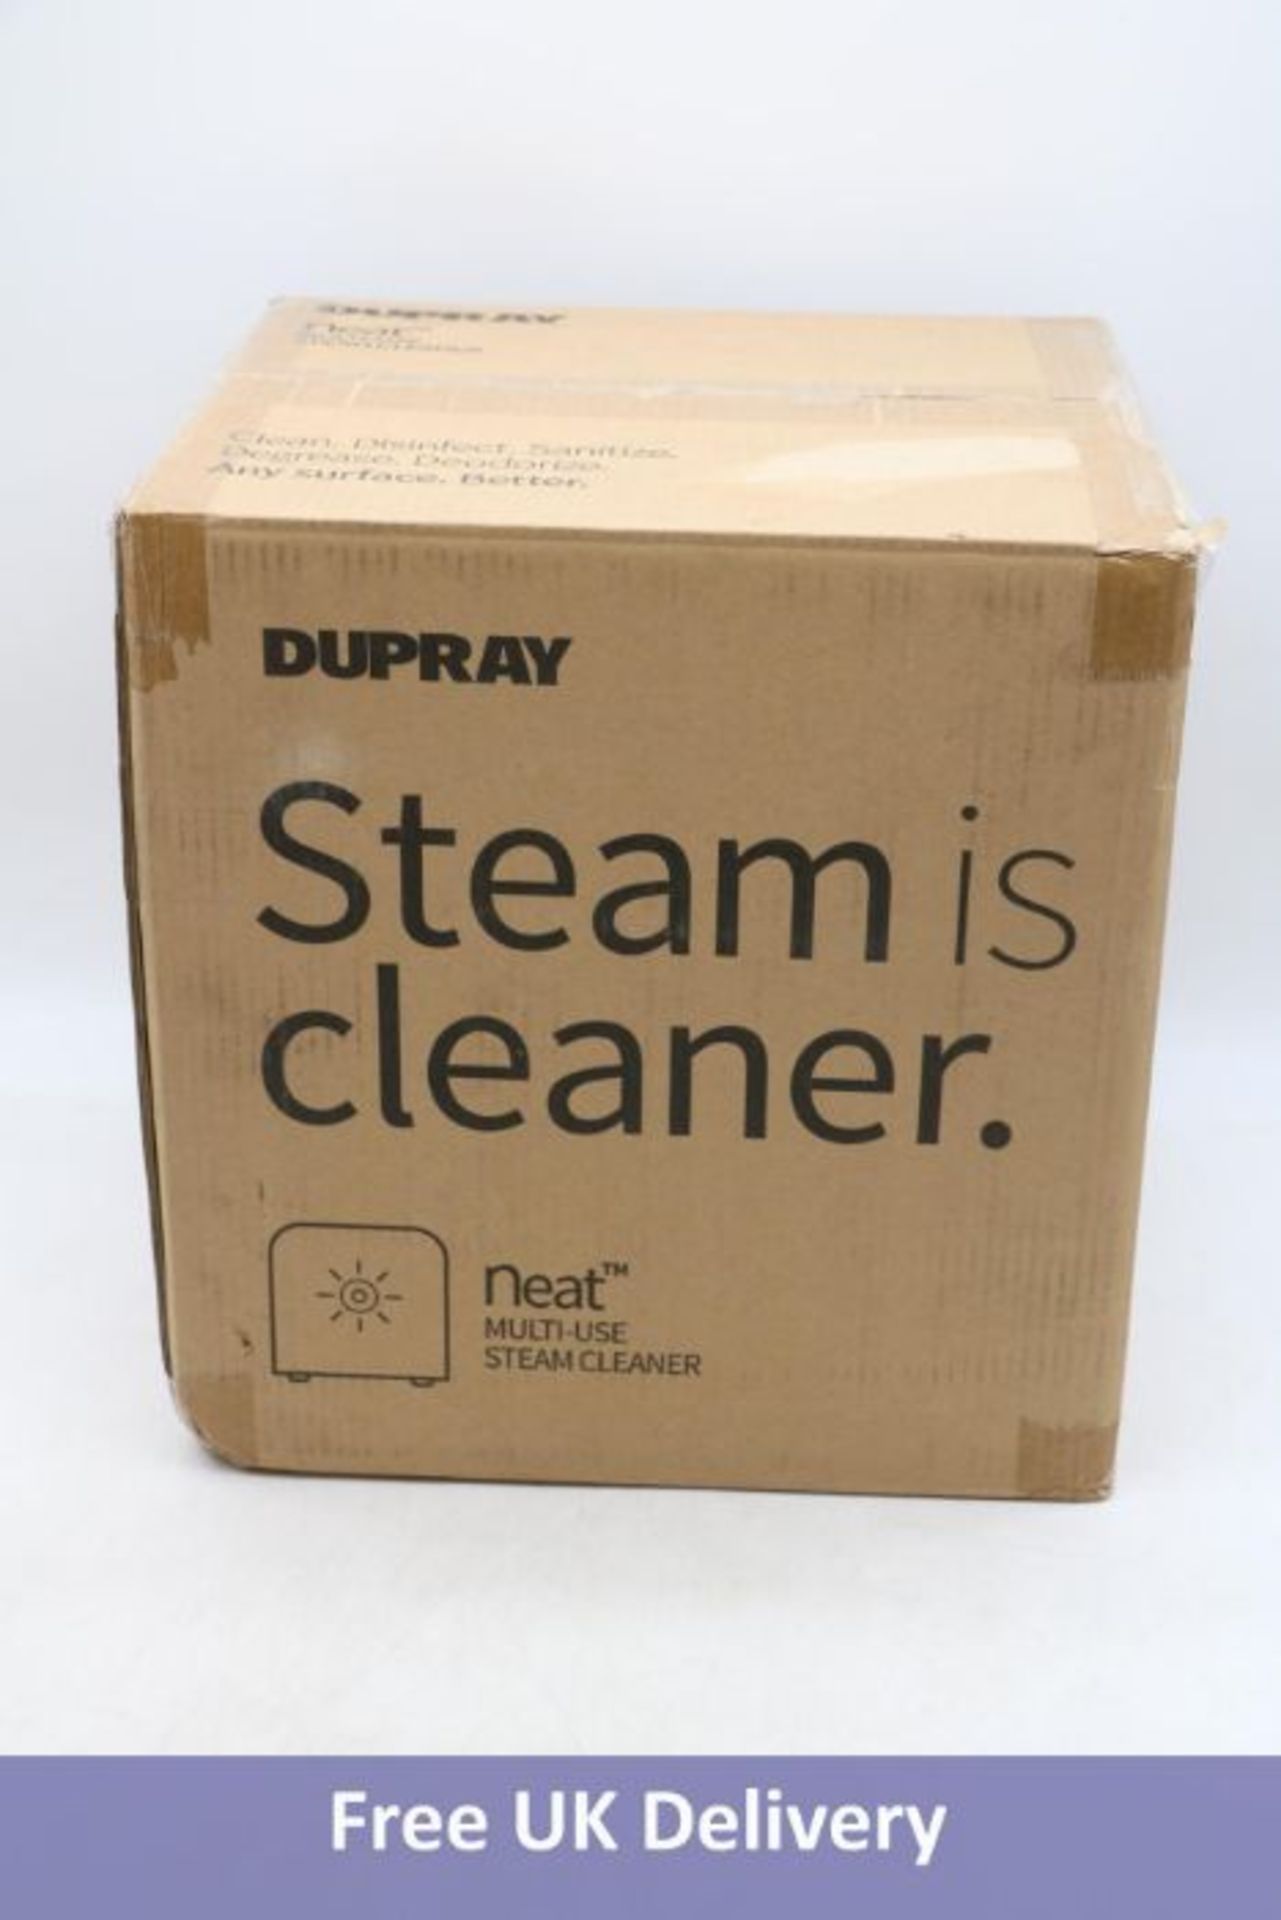 Dupray Neat Steam Cleaner, DUP020WUK, White